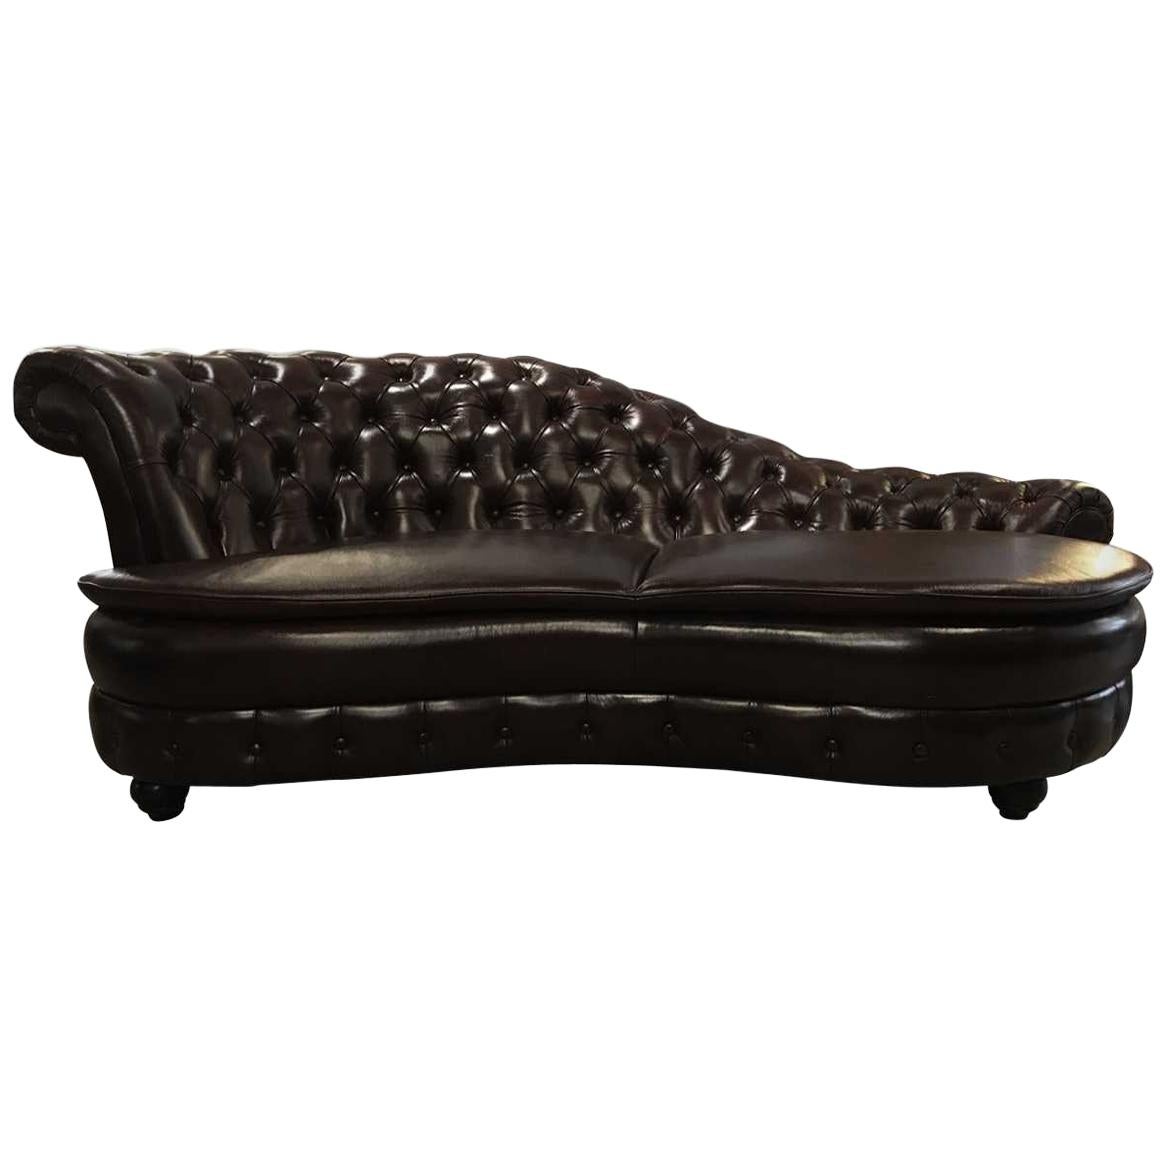 Chesterfield Style Chaise Lounge